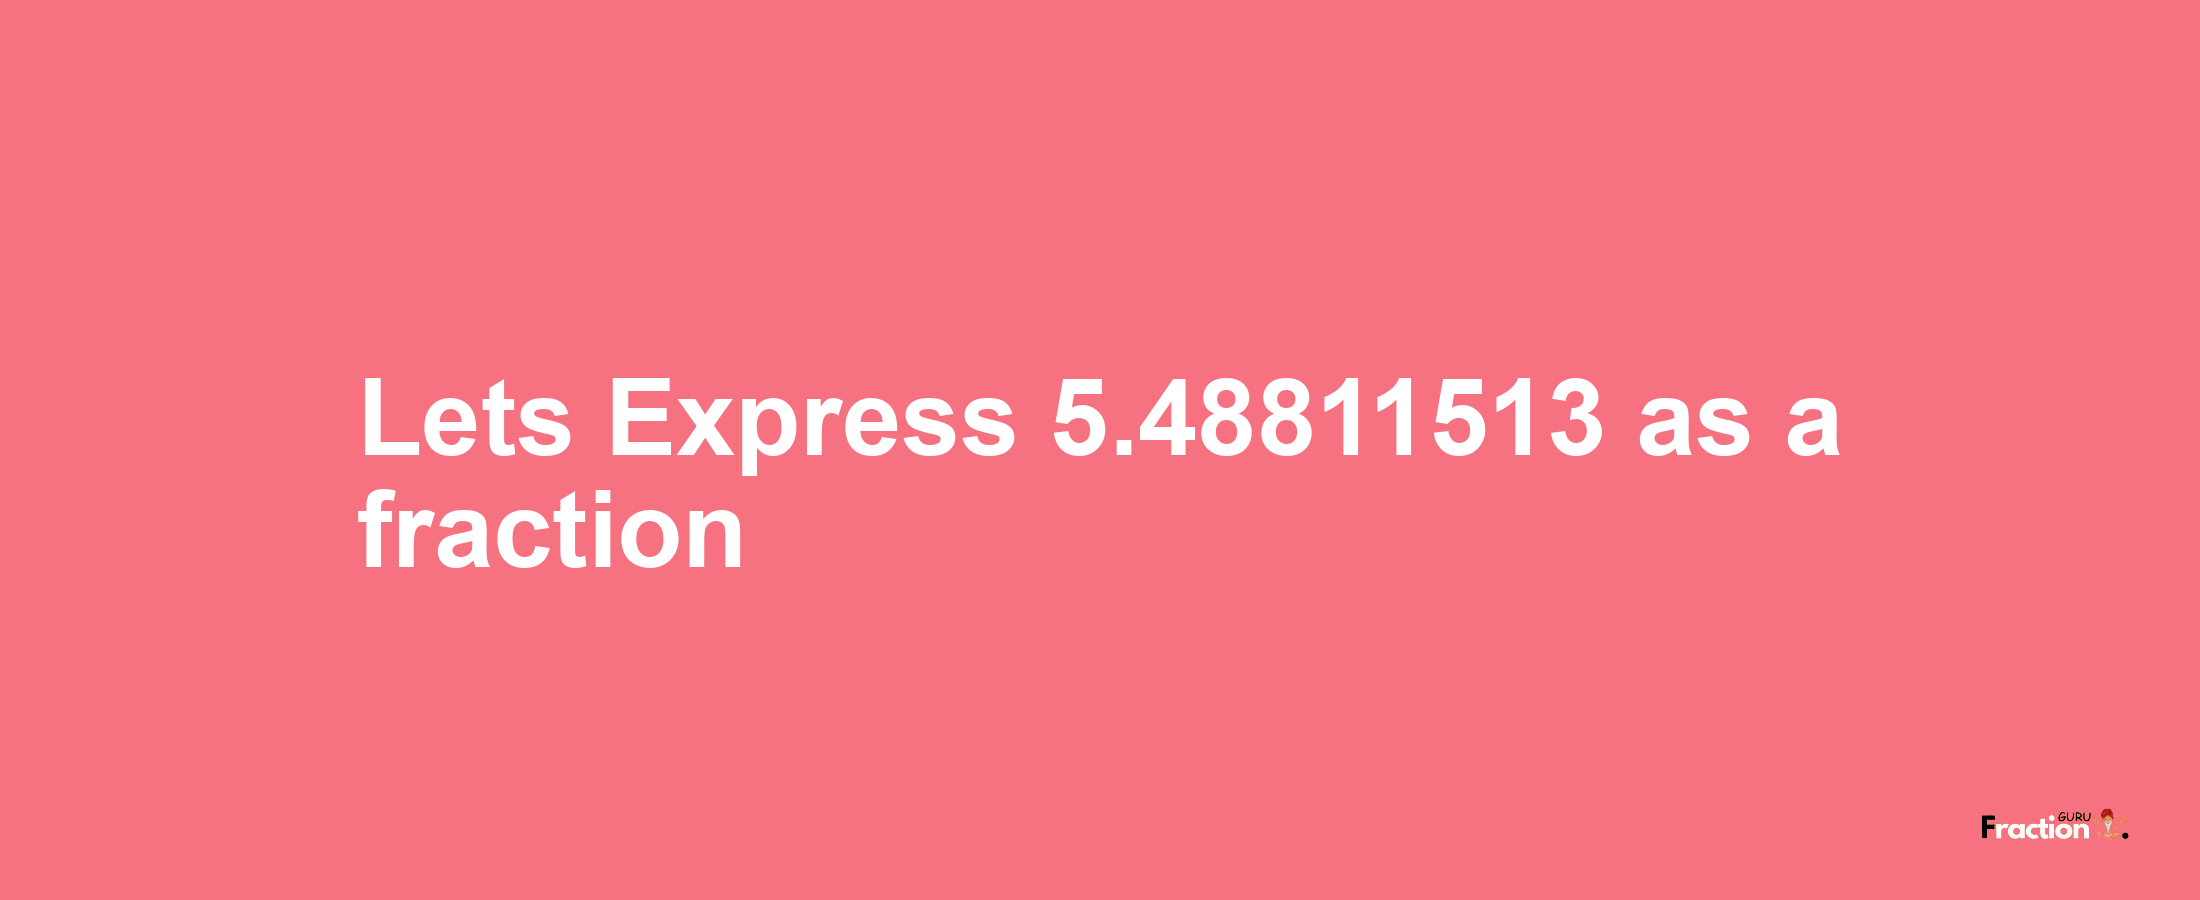 Lets Express 5.48811513 as afraction